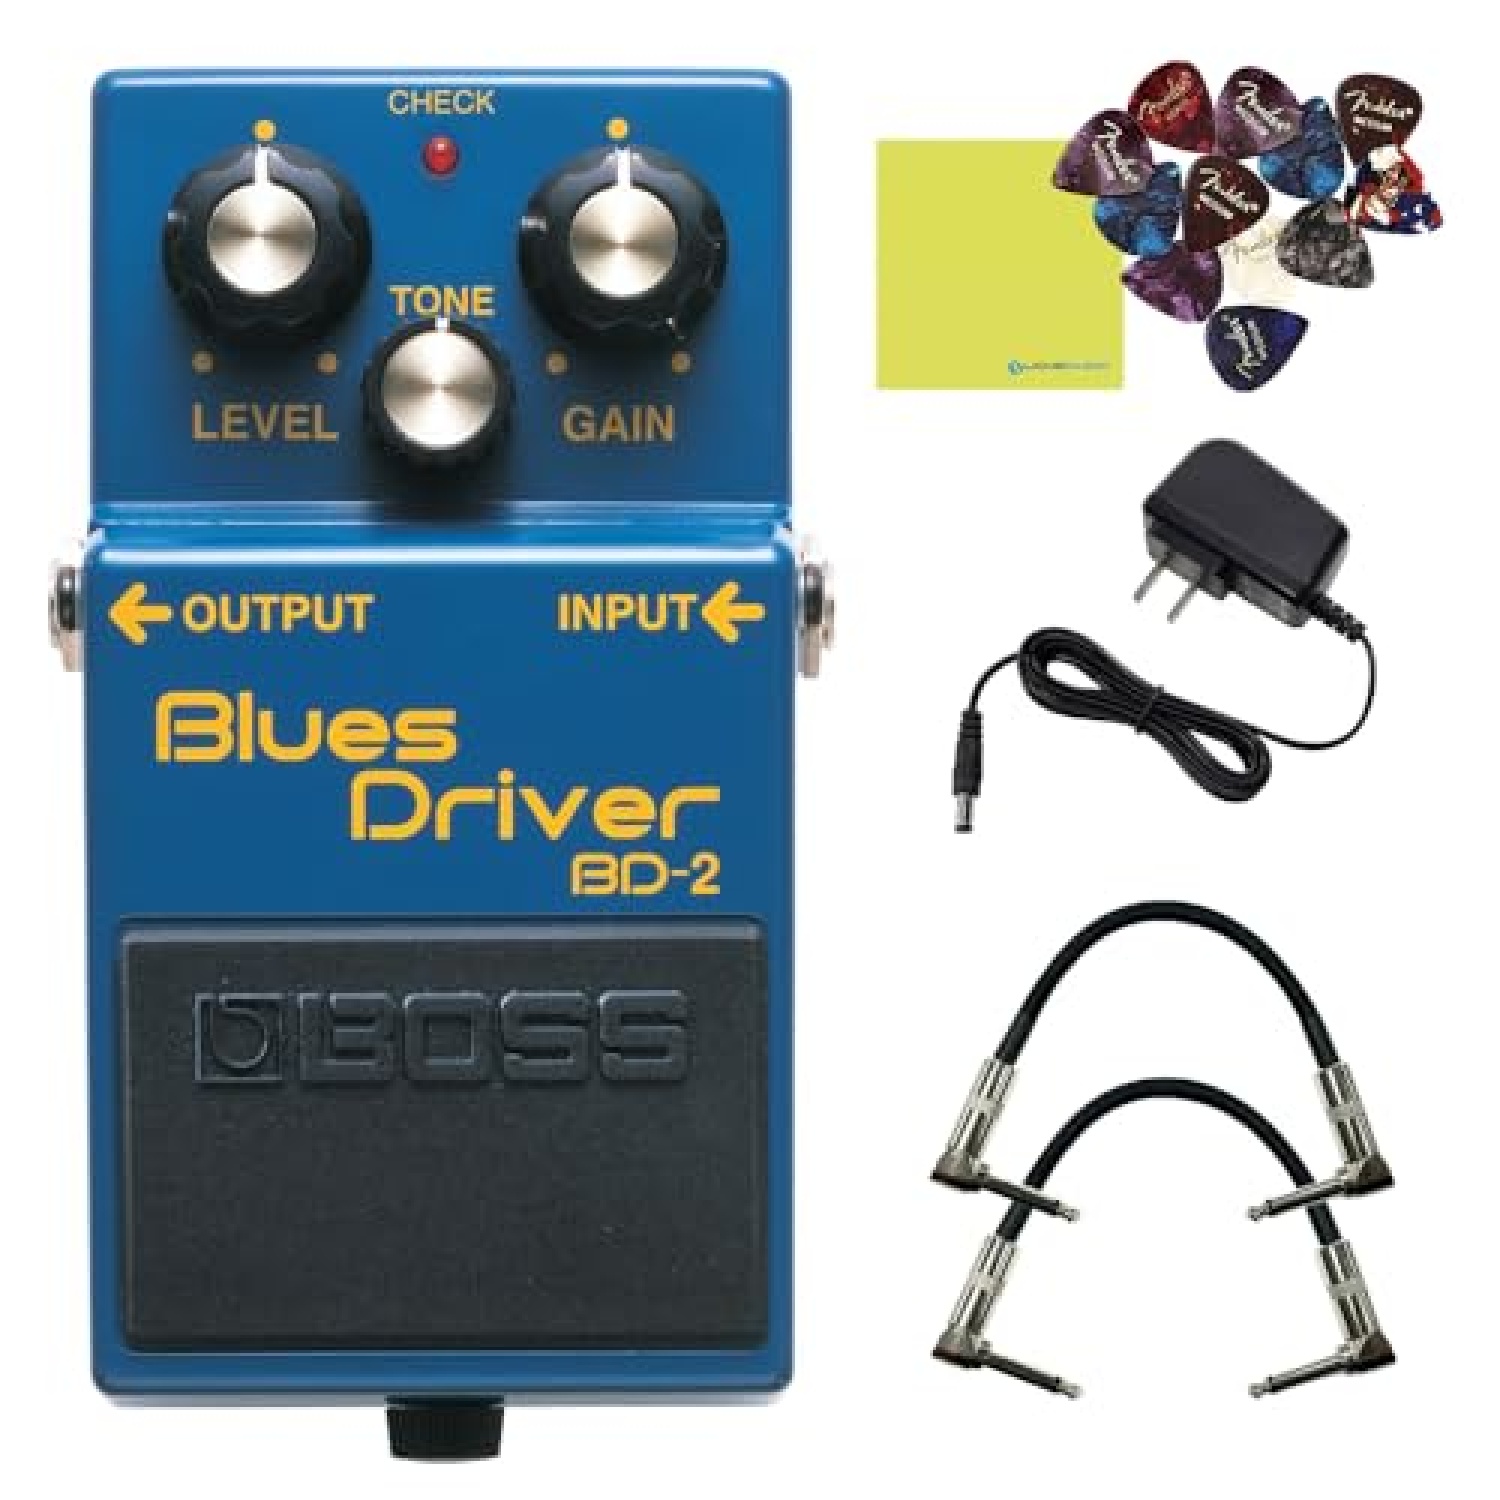 Boss BD-2 Blues Driver Effects Pedal Bundle w/2x Strukture S6P48 Woven Right Angle Patch Cables, 12x Guitar Picks, 9V Power Adapter and Liquid Audio Polishing Cloth